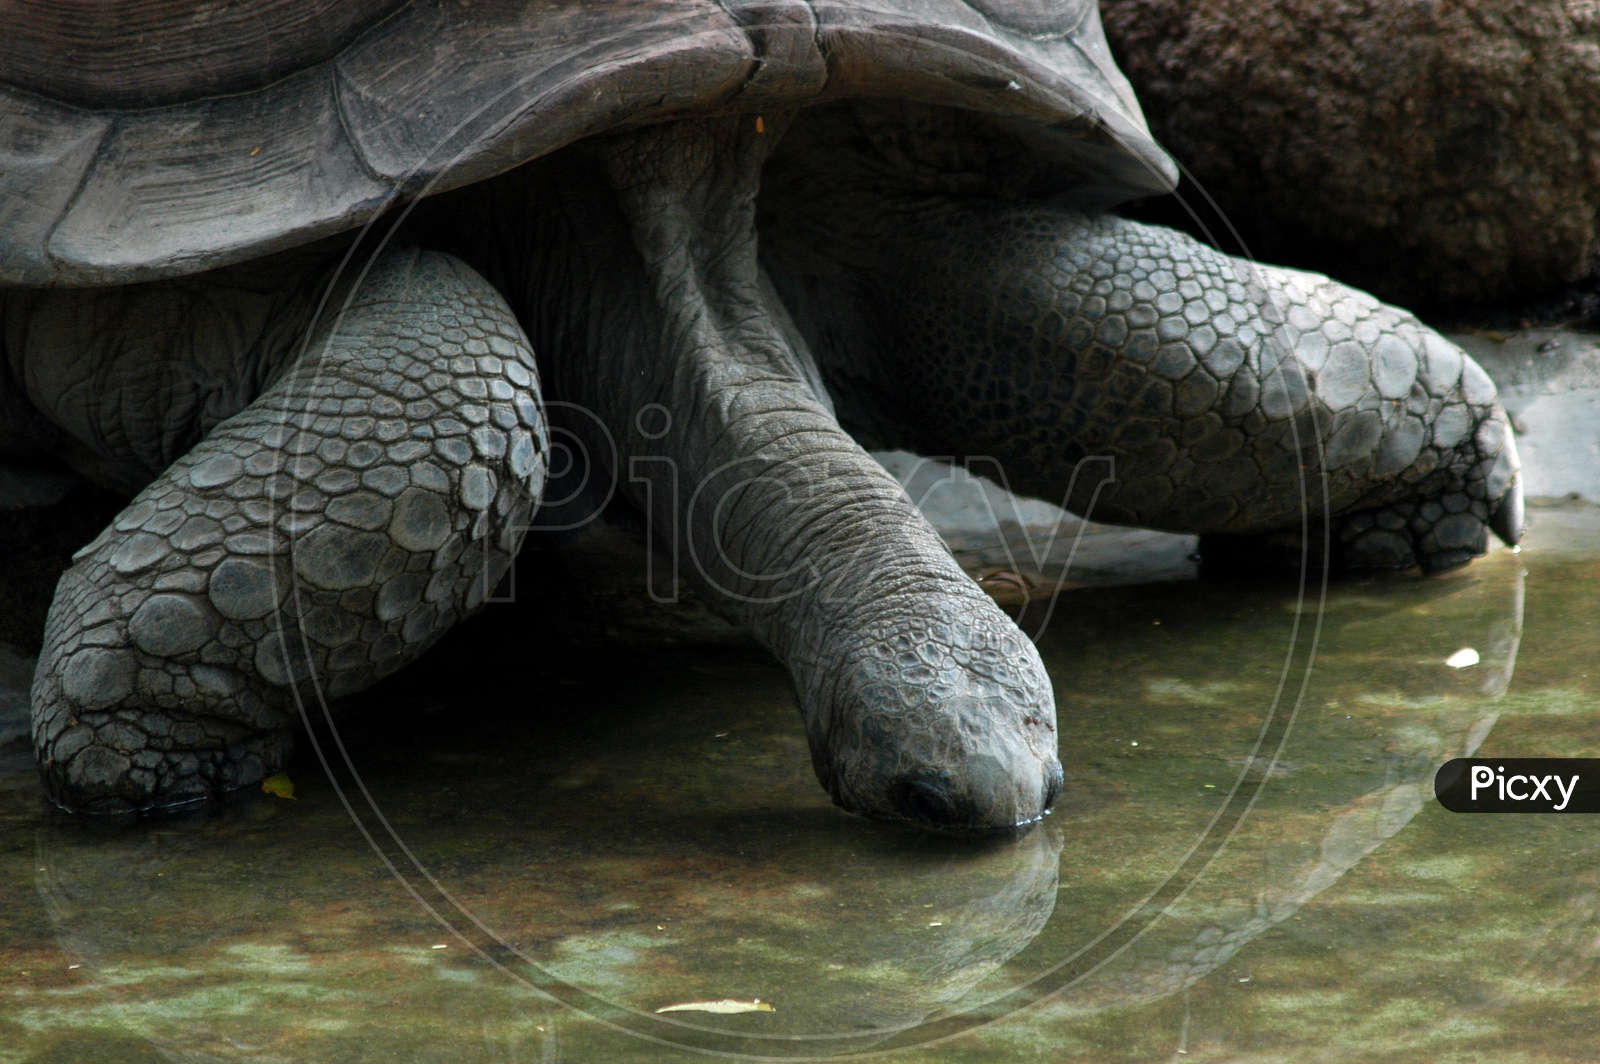 A Galápagos Tortoise drinking water